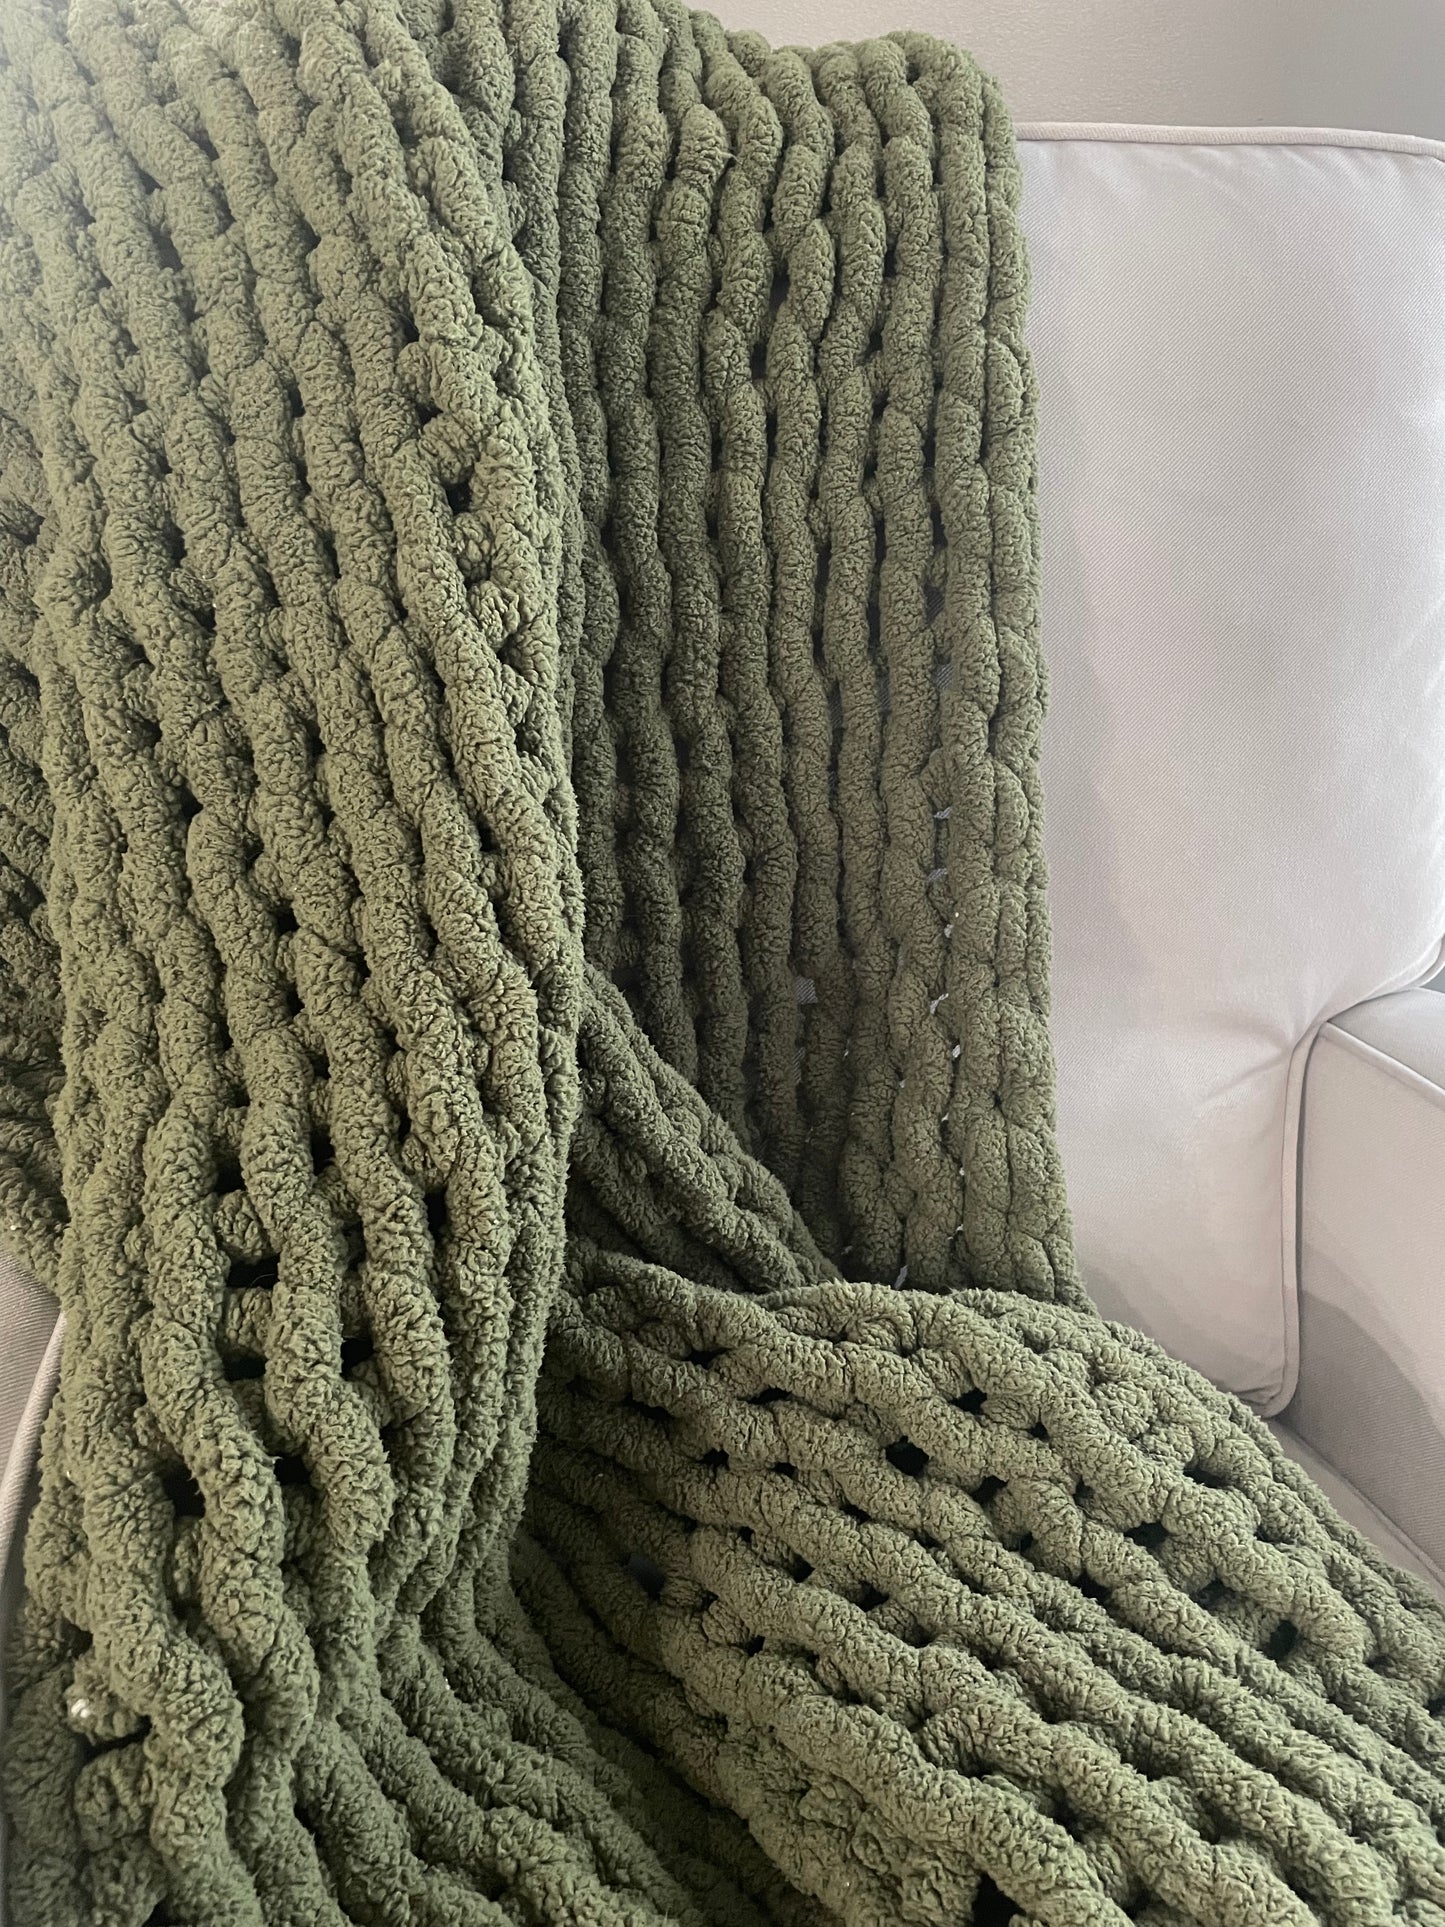 Chunky Hand Knitted Blankets